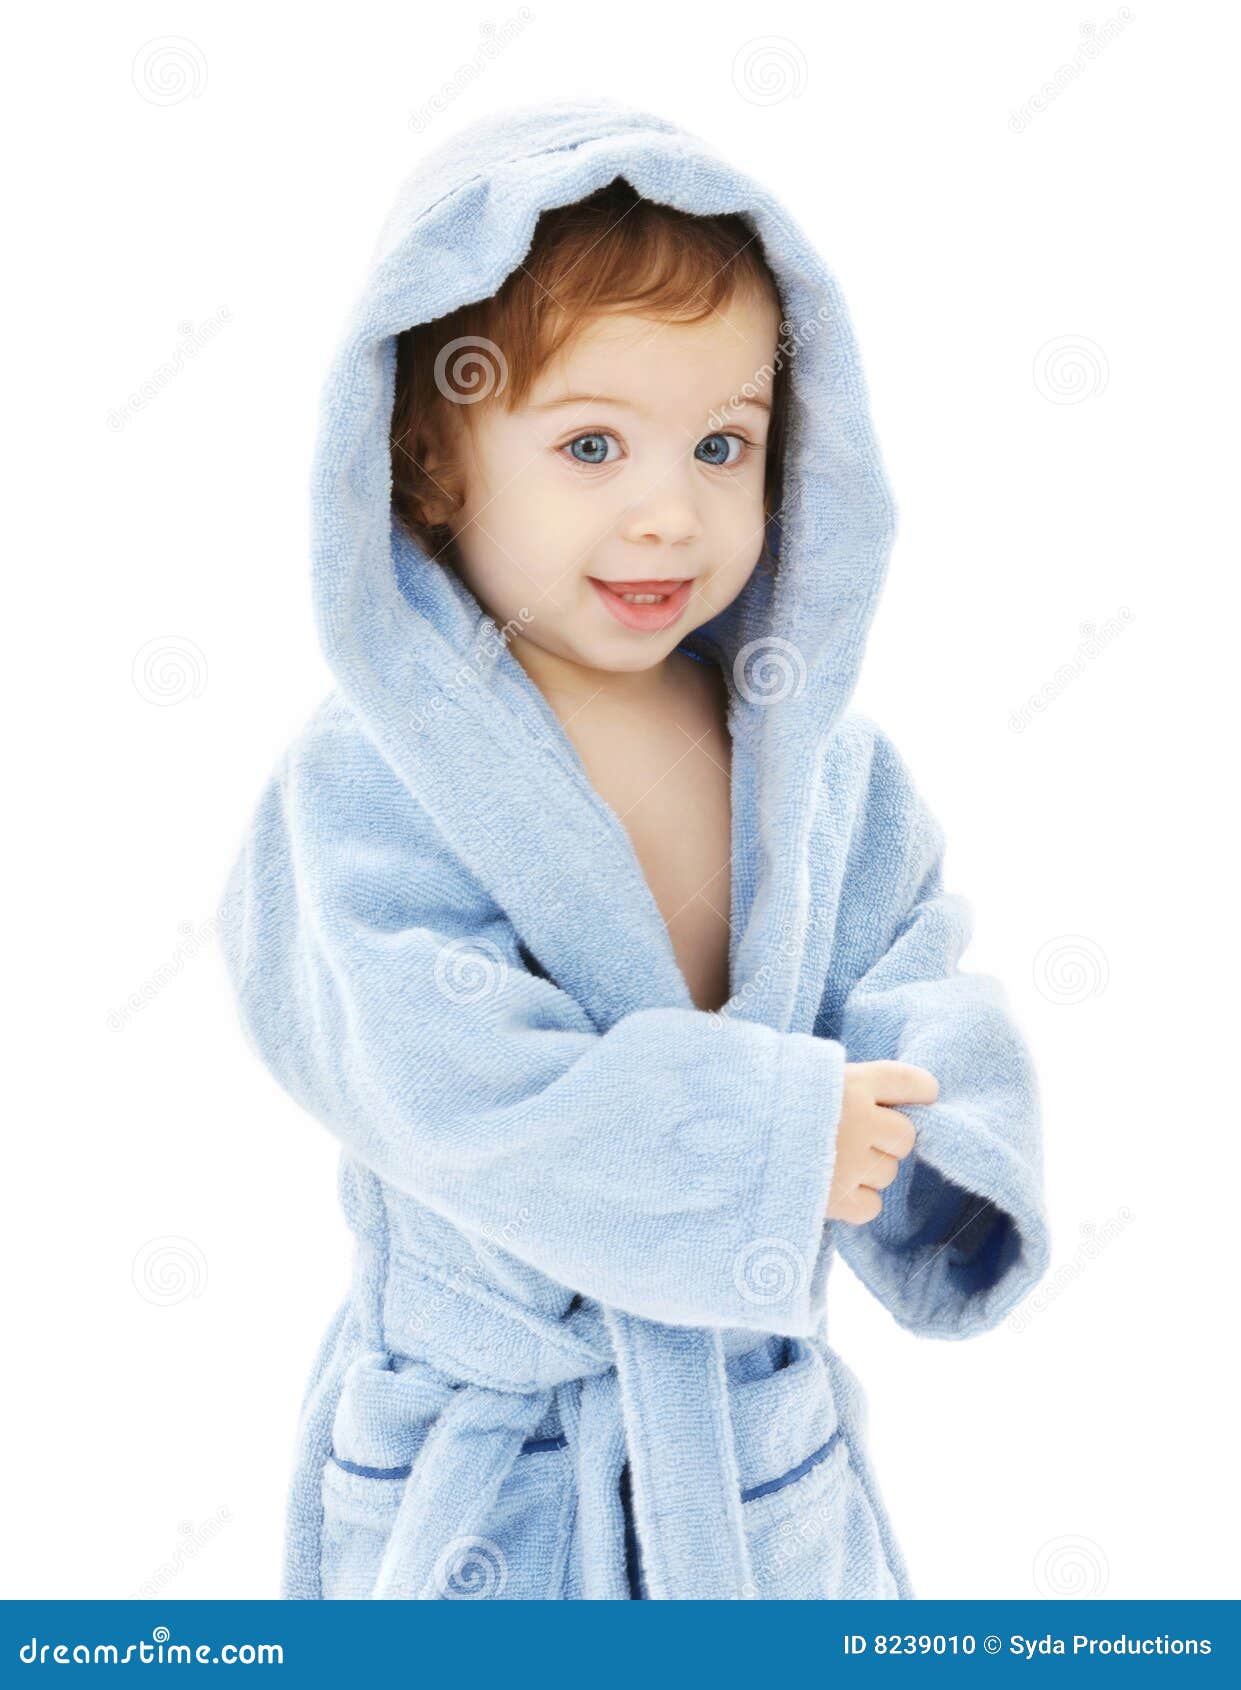 Baby boy in blue robe stock photo. Image of care, happy - 8239010